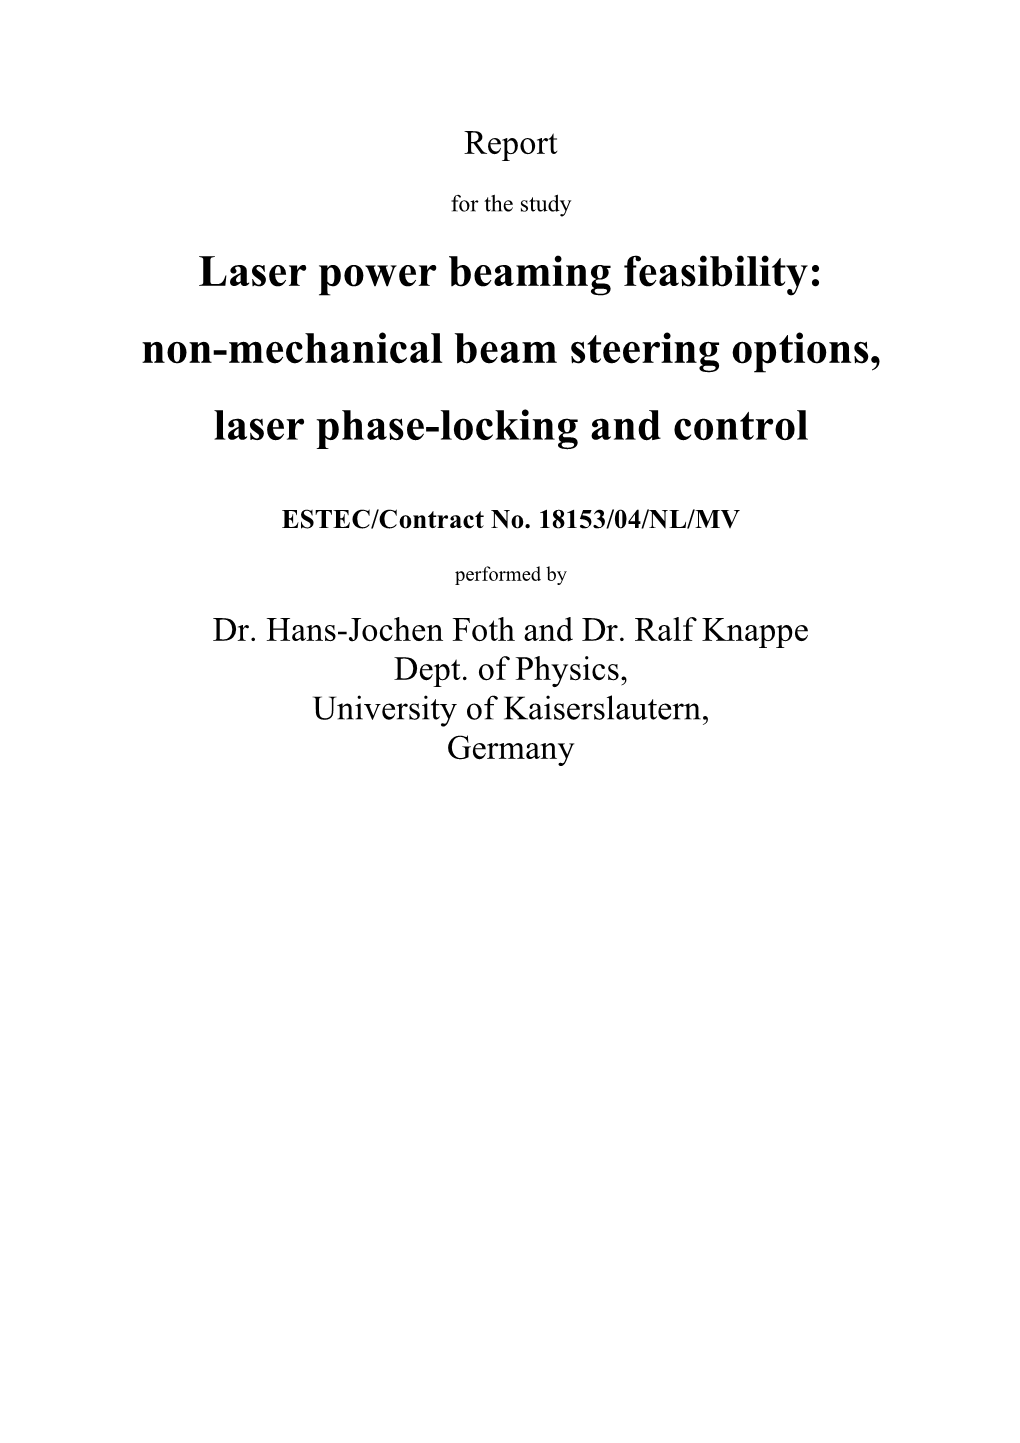 Laser Power Beaming Feasibility: Non-Mechanical Beam Steering Options, Laser Phase-Locking and Control